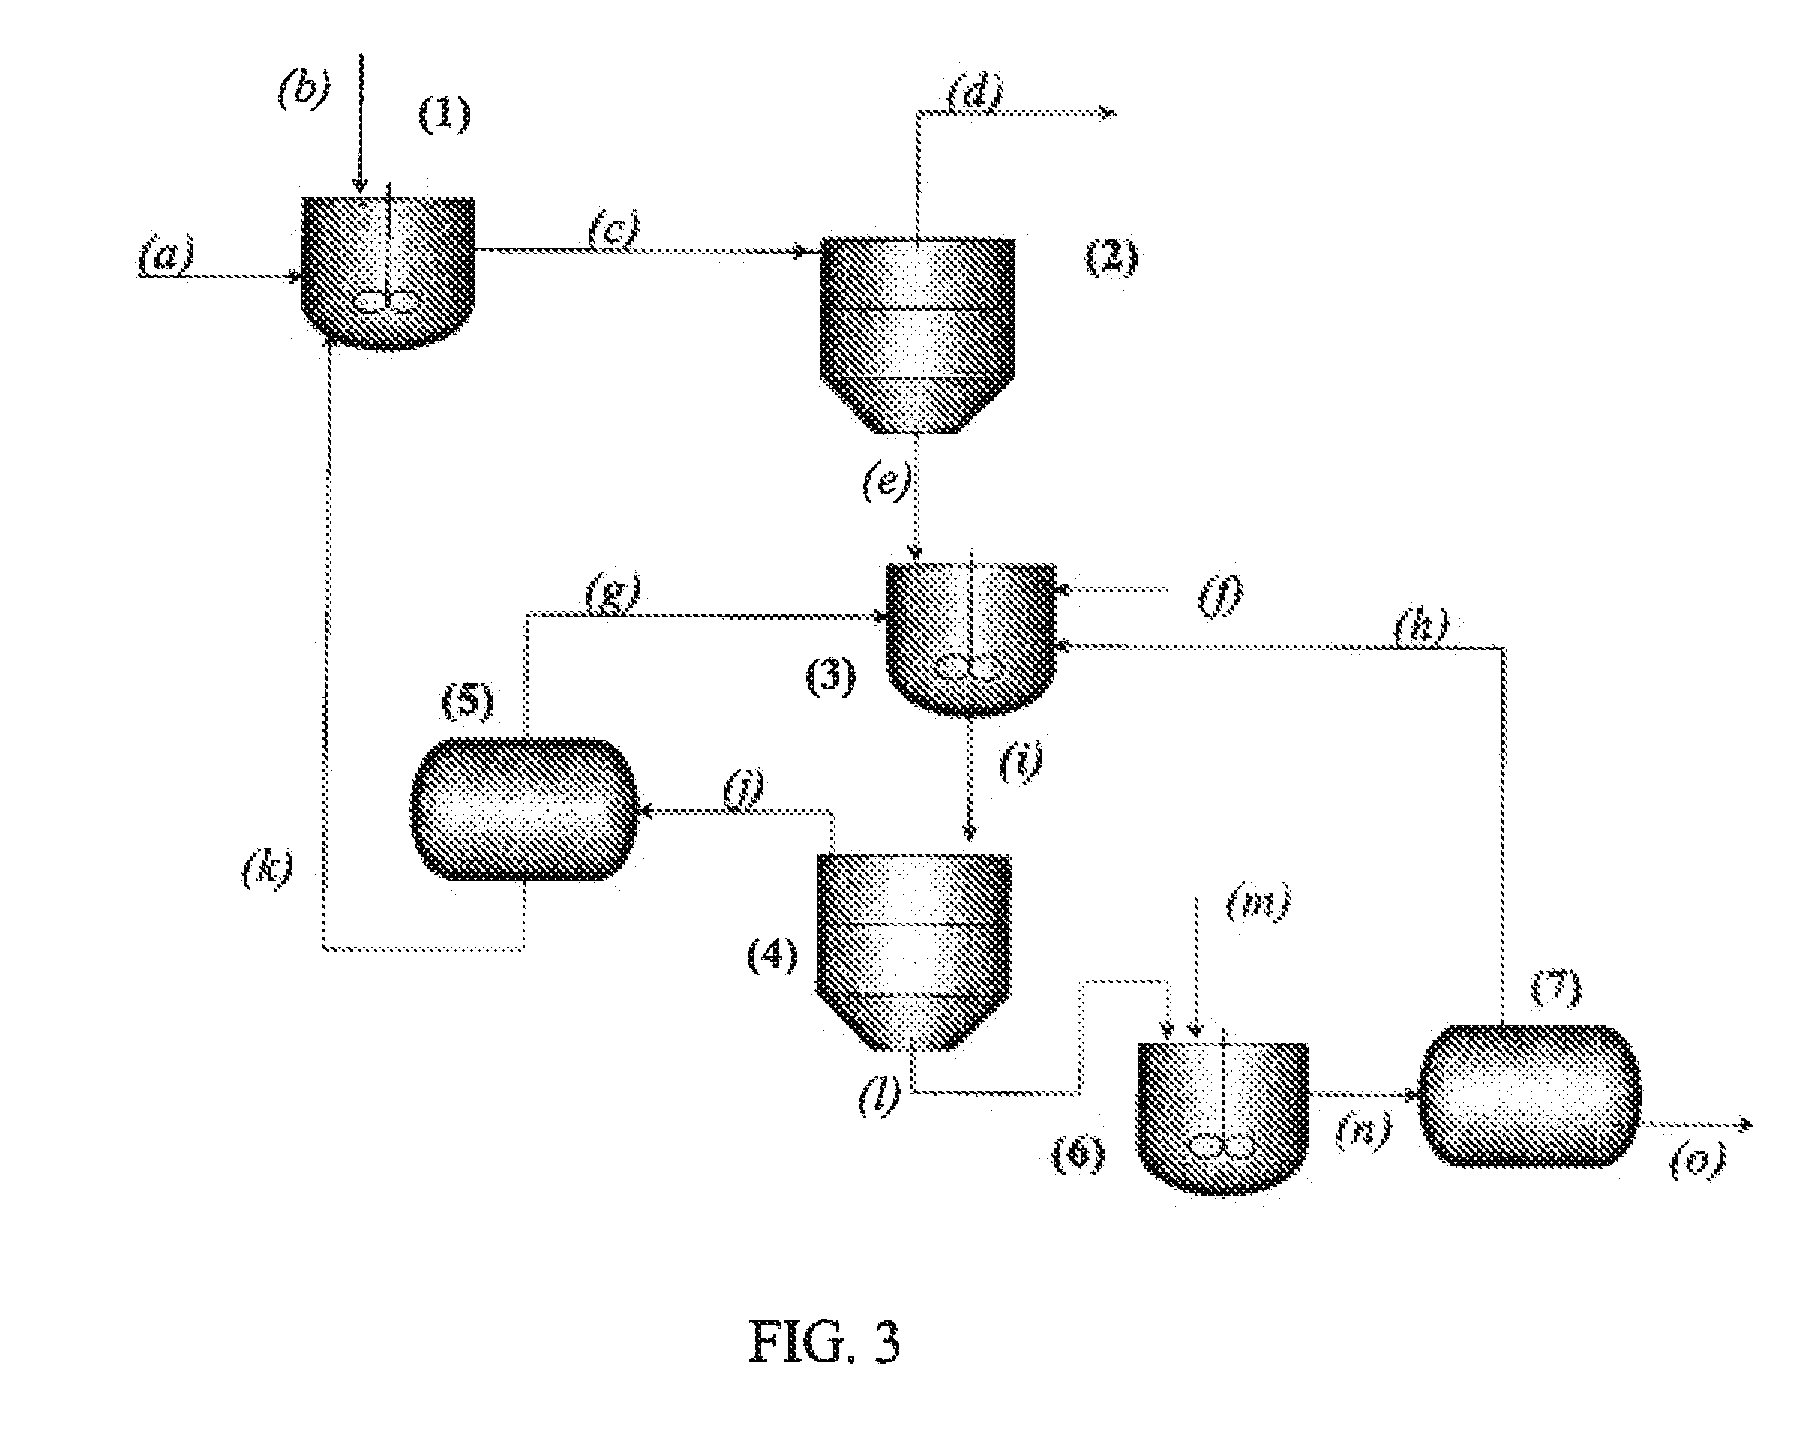 Method for purifying an alcohol from a fermentation broth using a falling film, a wiped film, a thin film or a short path evaporator